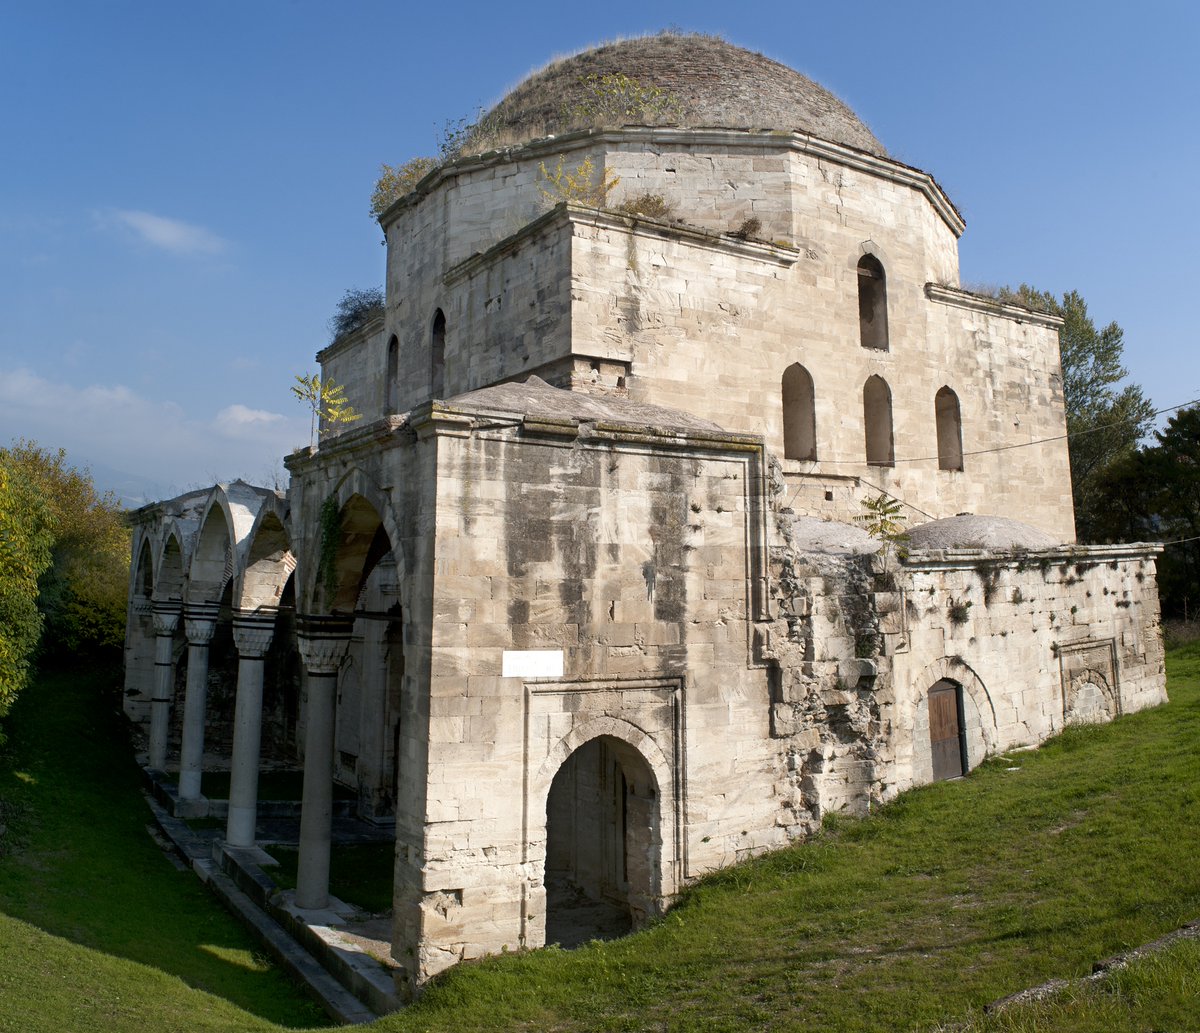 Mehmed Bey Mosque, SerezThis late-15th Century mosque is the largest and oldest surviving former mosque of Serres. Suffered extensive damage as the city was cleansed off Muslims, today the building is derelict and unused.